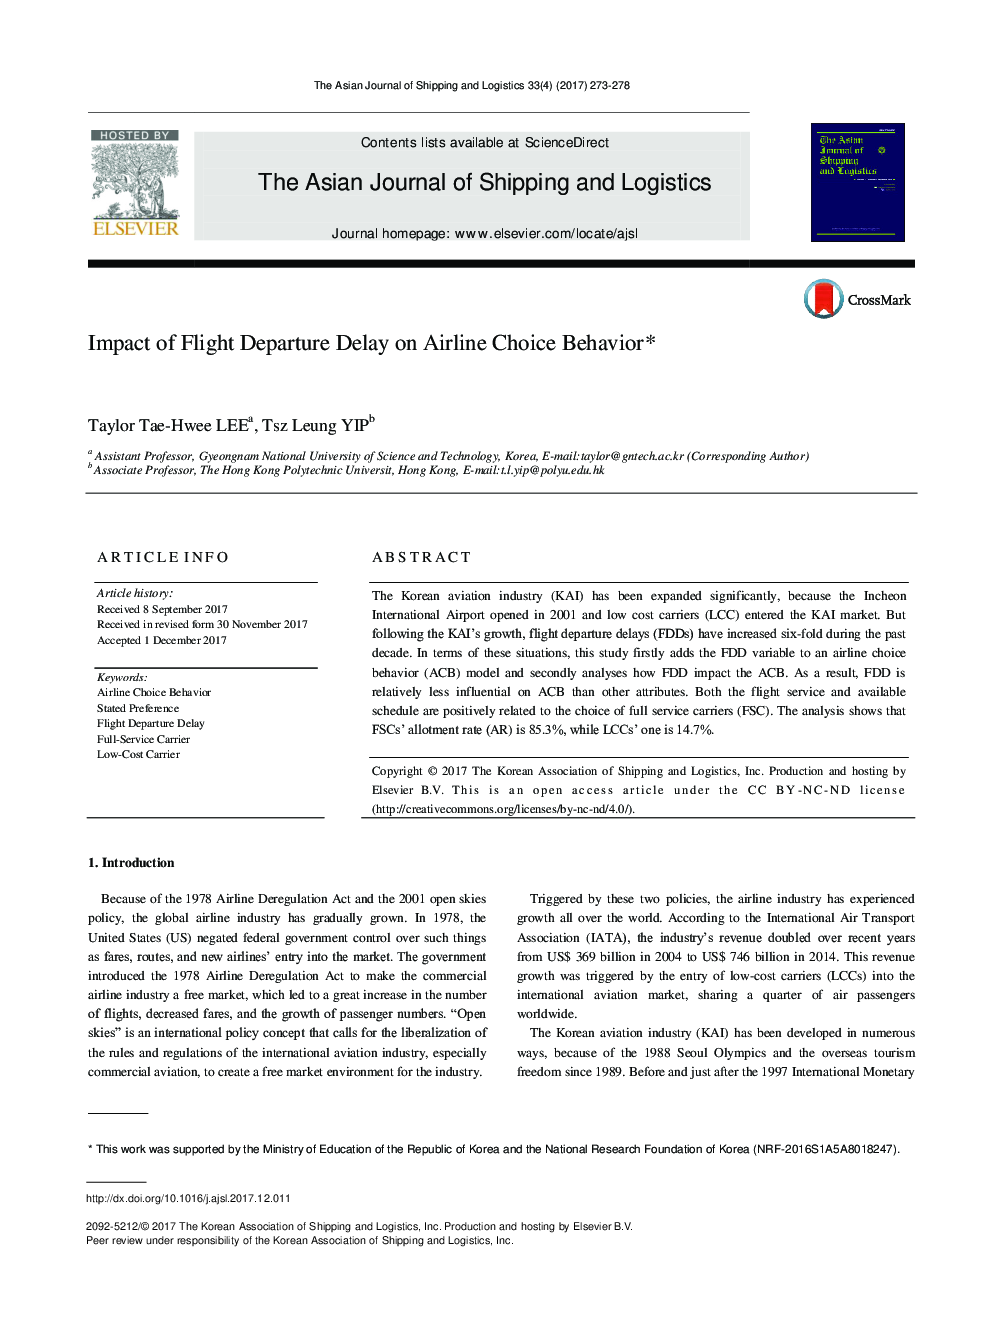 Impact of Flight Departure Delay on Airline Choice Behavior